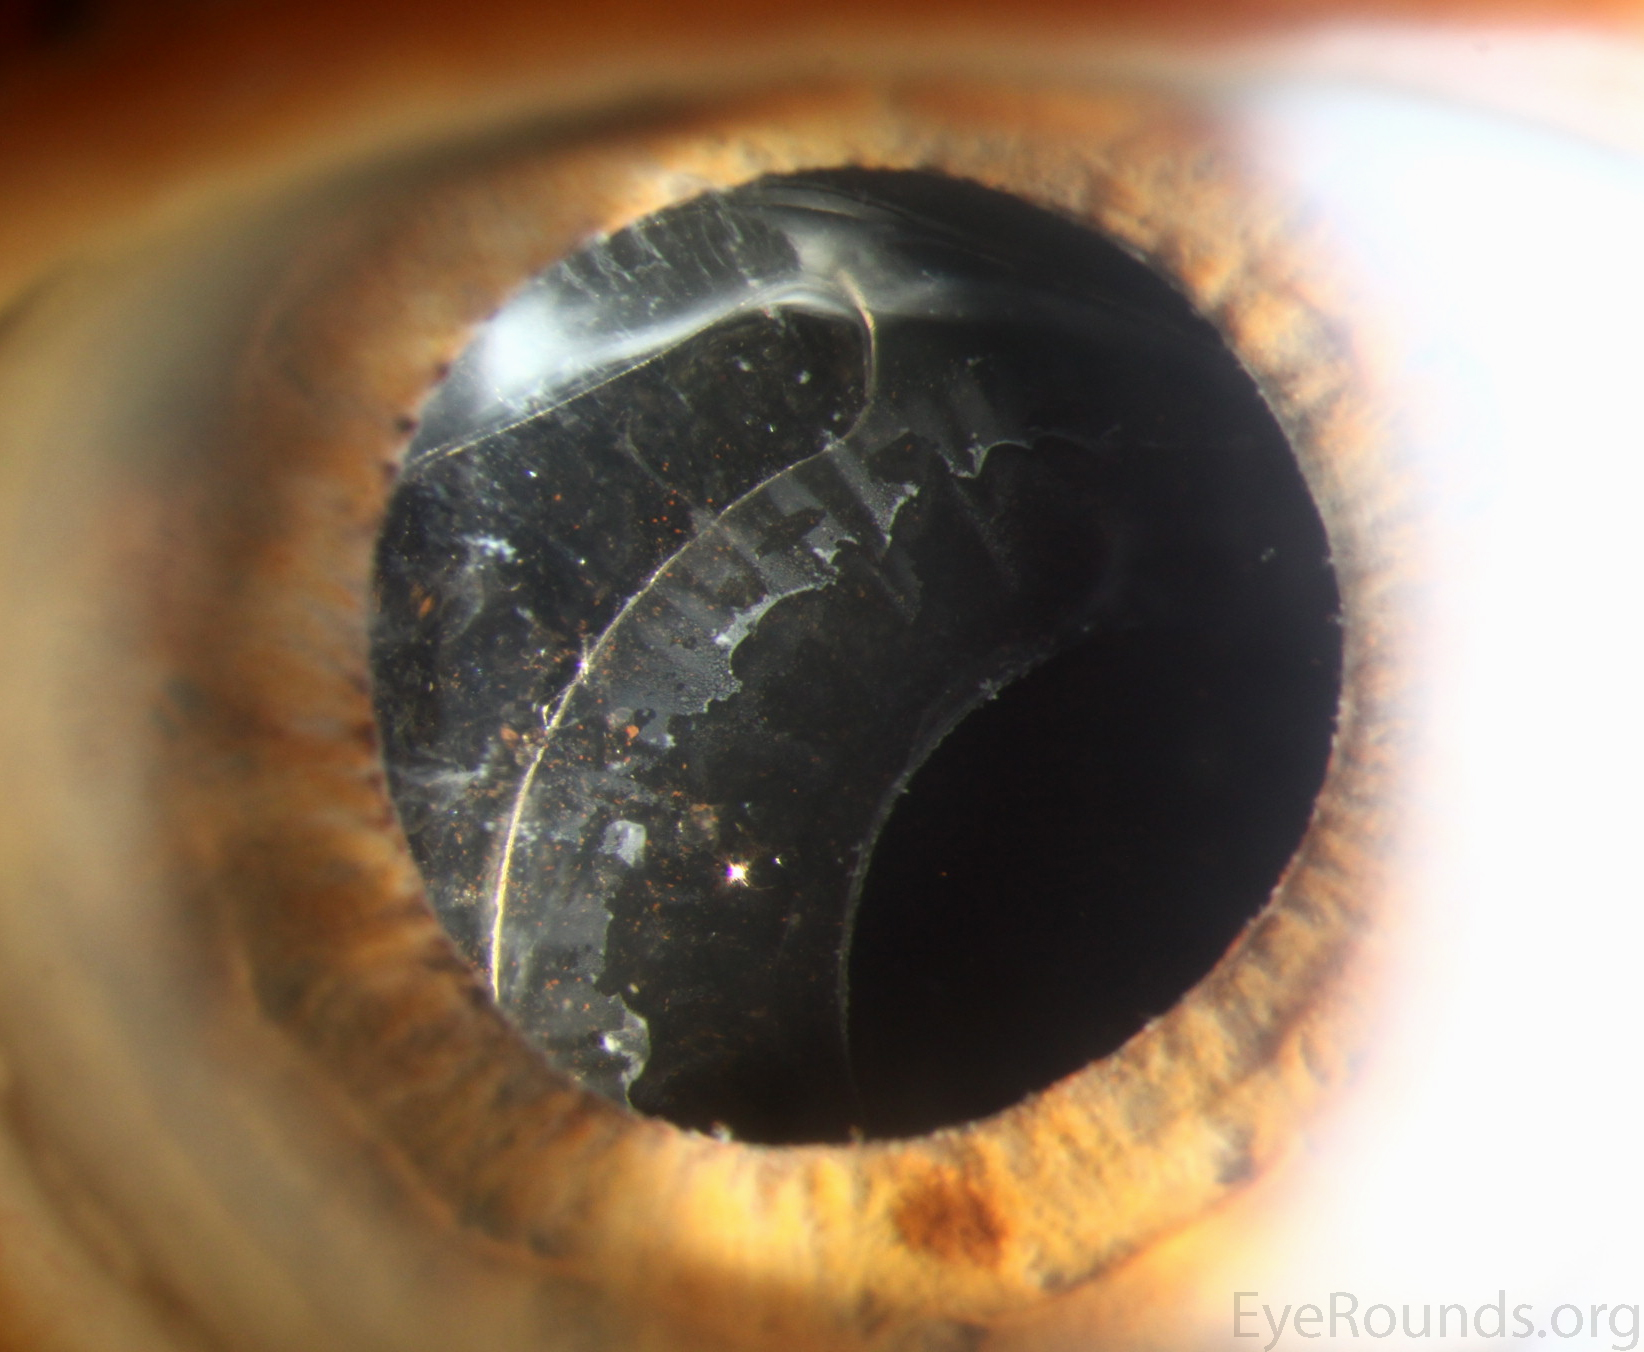 Subluxated intraocular lens implant occurring spontaneously many years after cataract surgery